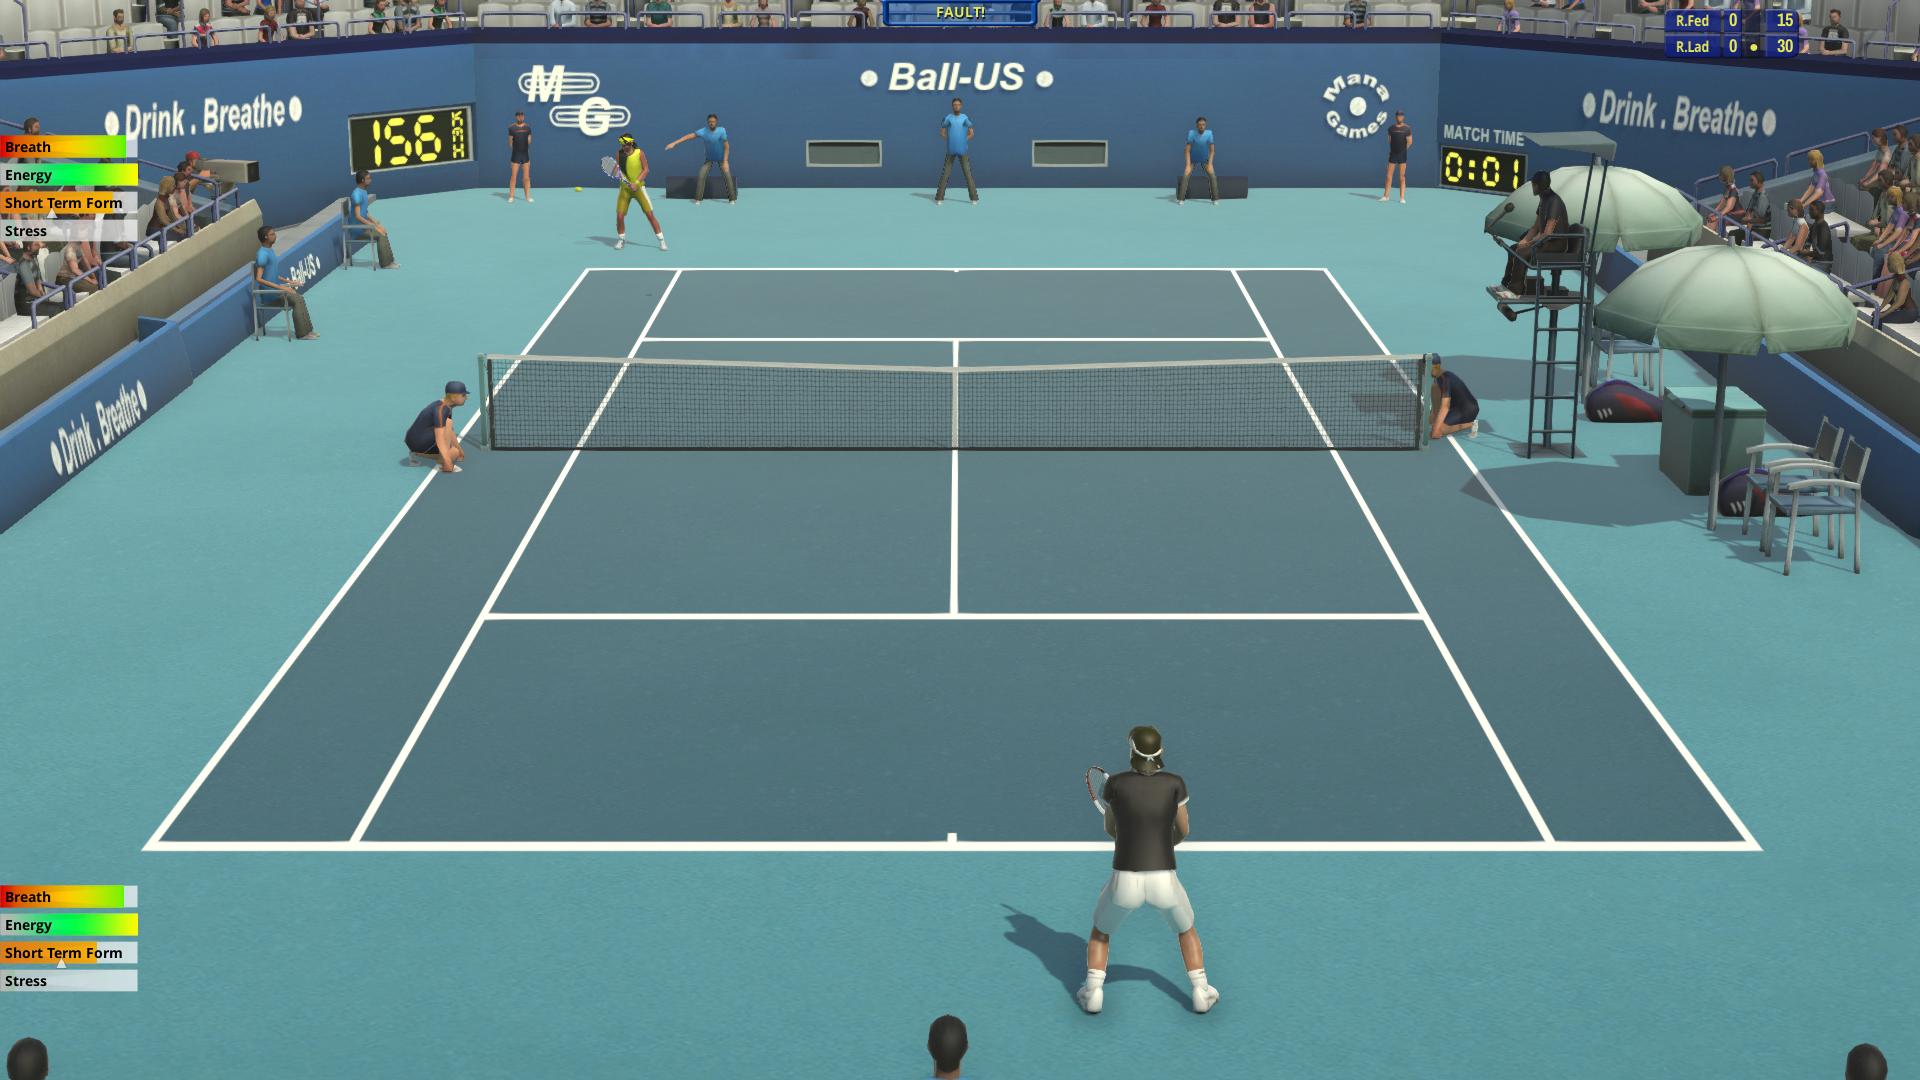 Tennis Elbow Manager 2 Free Download